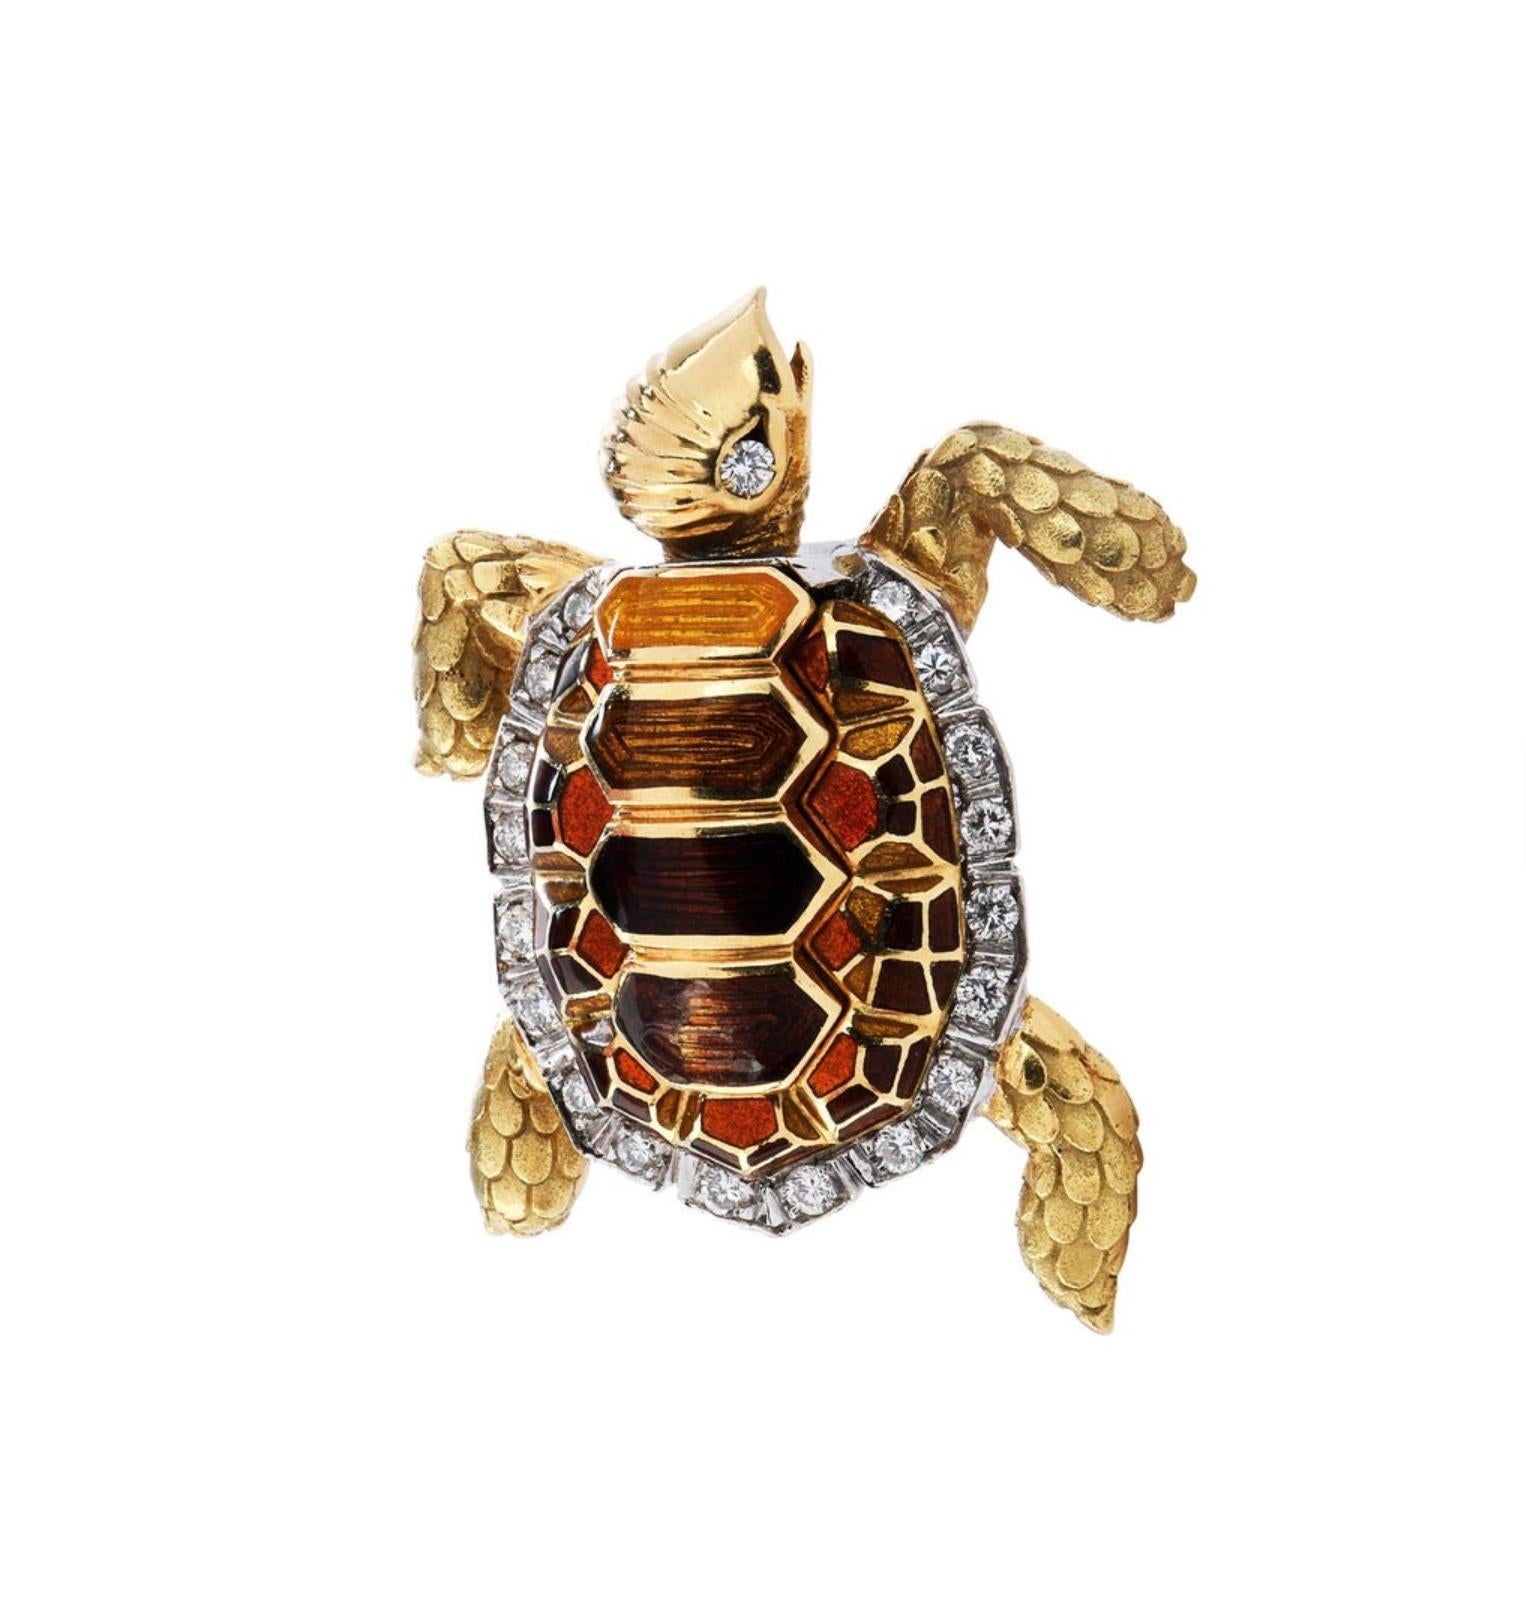  Beautifully crafted in solid 18K Yellow Gold, this Turtle Gem Brooch is finely encrusted with brilliant Natural Diamonds approx. 0.86 carats, G-h color, VS clarity. 

The turtle shell is adorned with color full of enamel from yellow to orange and